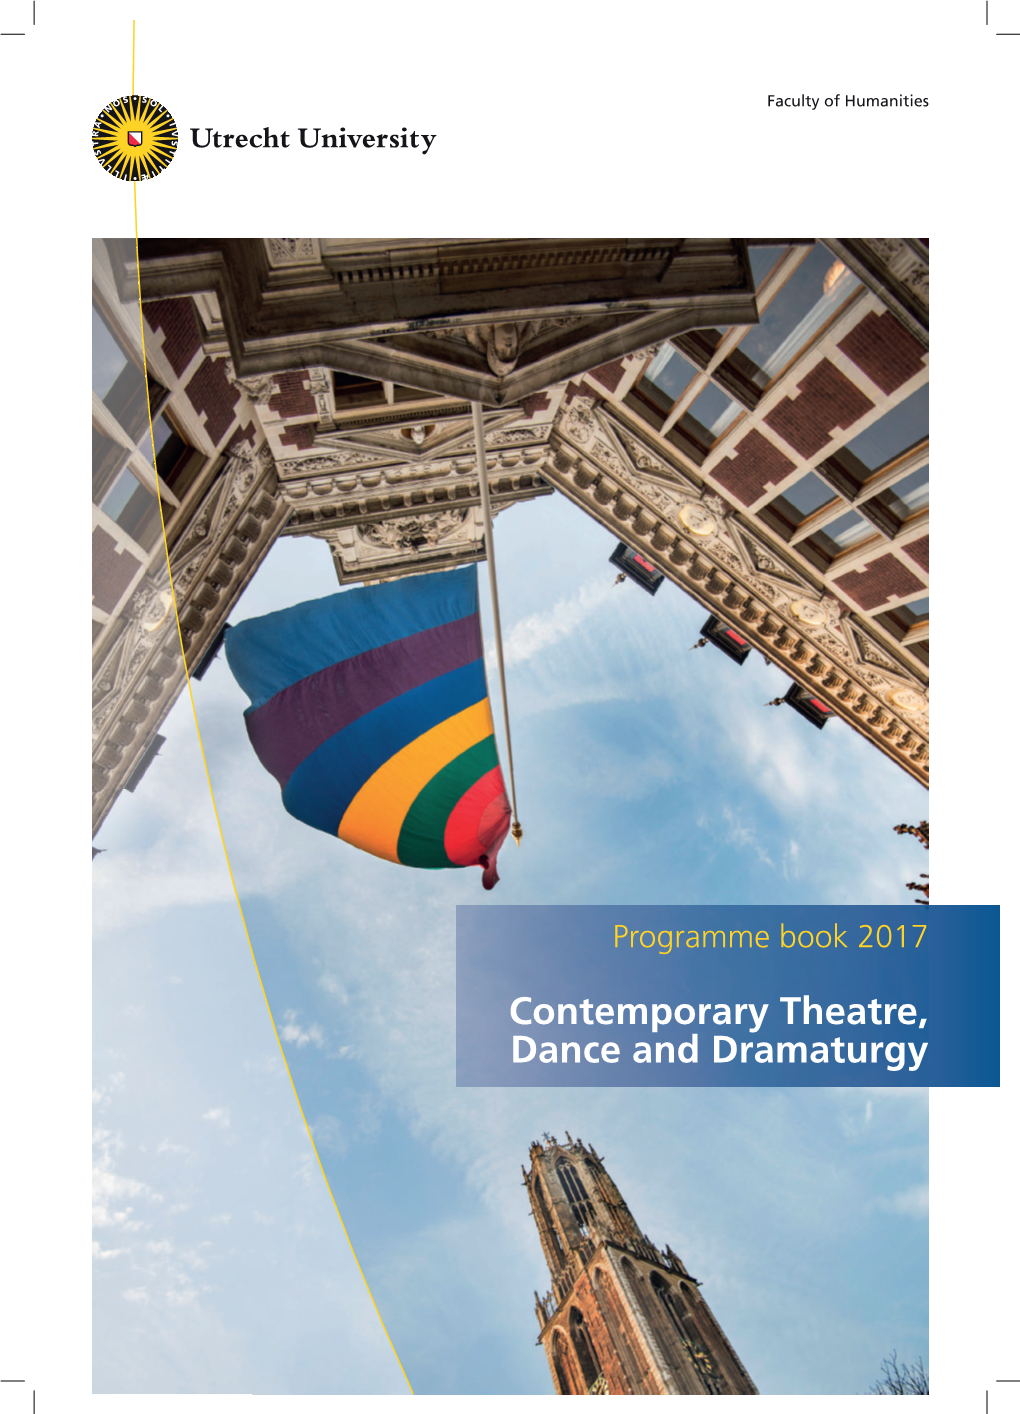 Contemporary Theatre, Dance and Dramaturgy